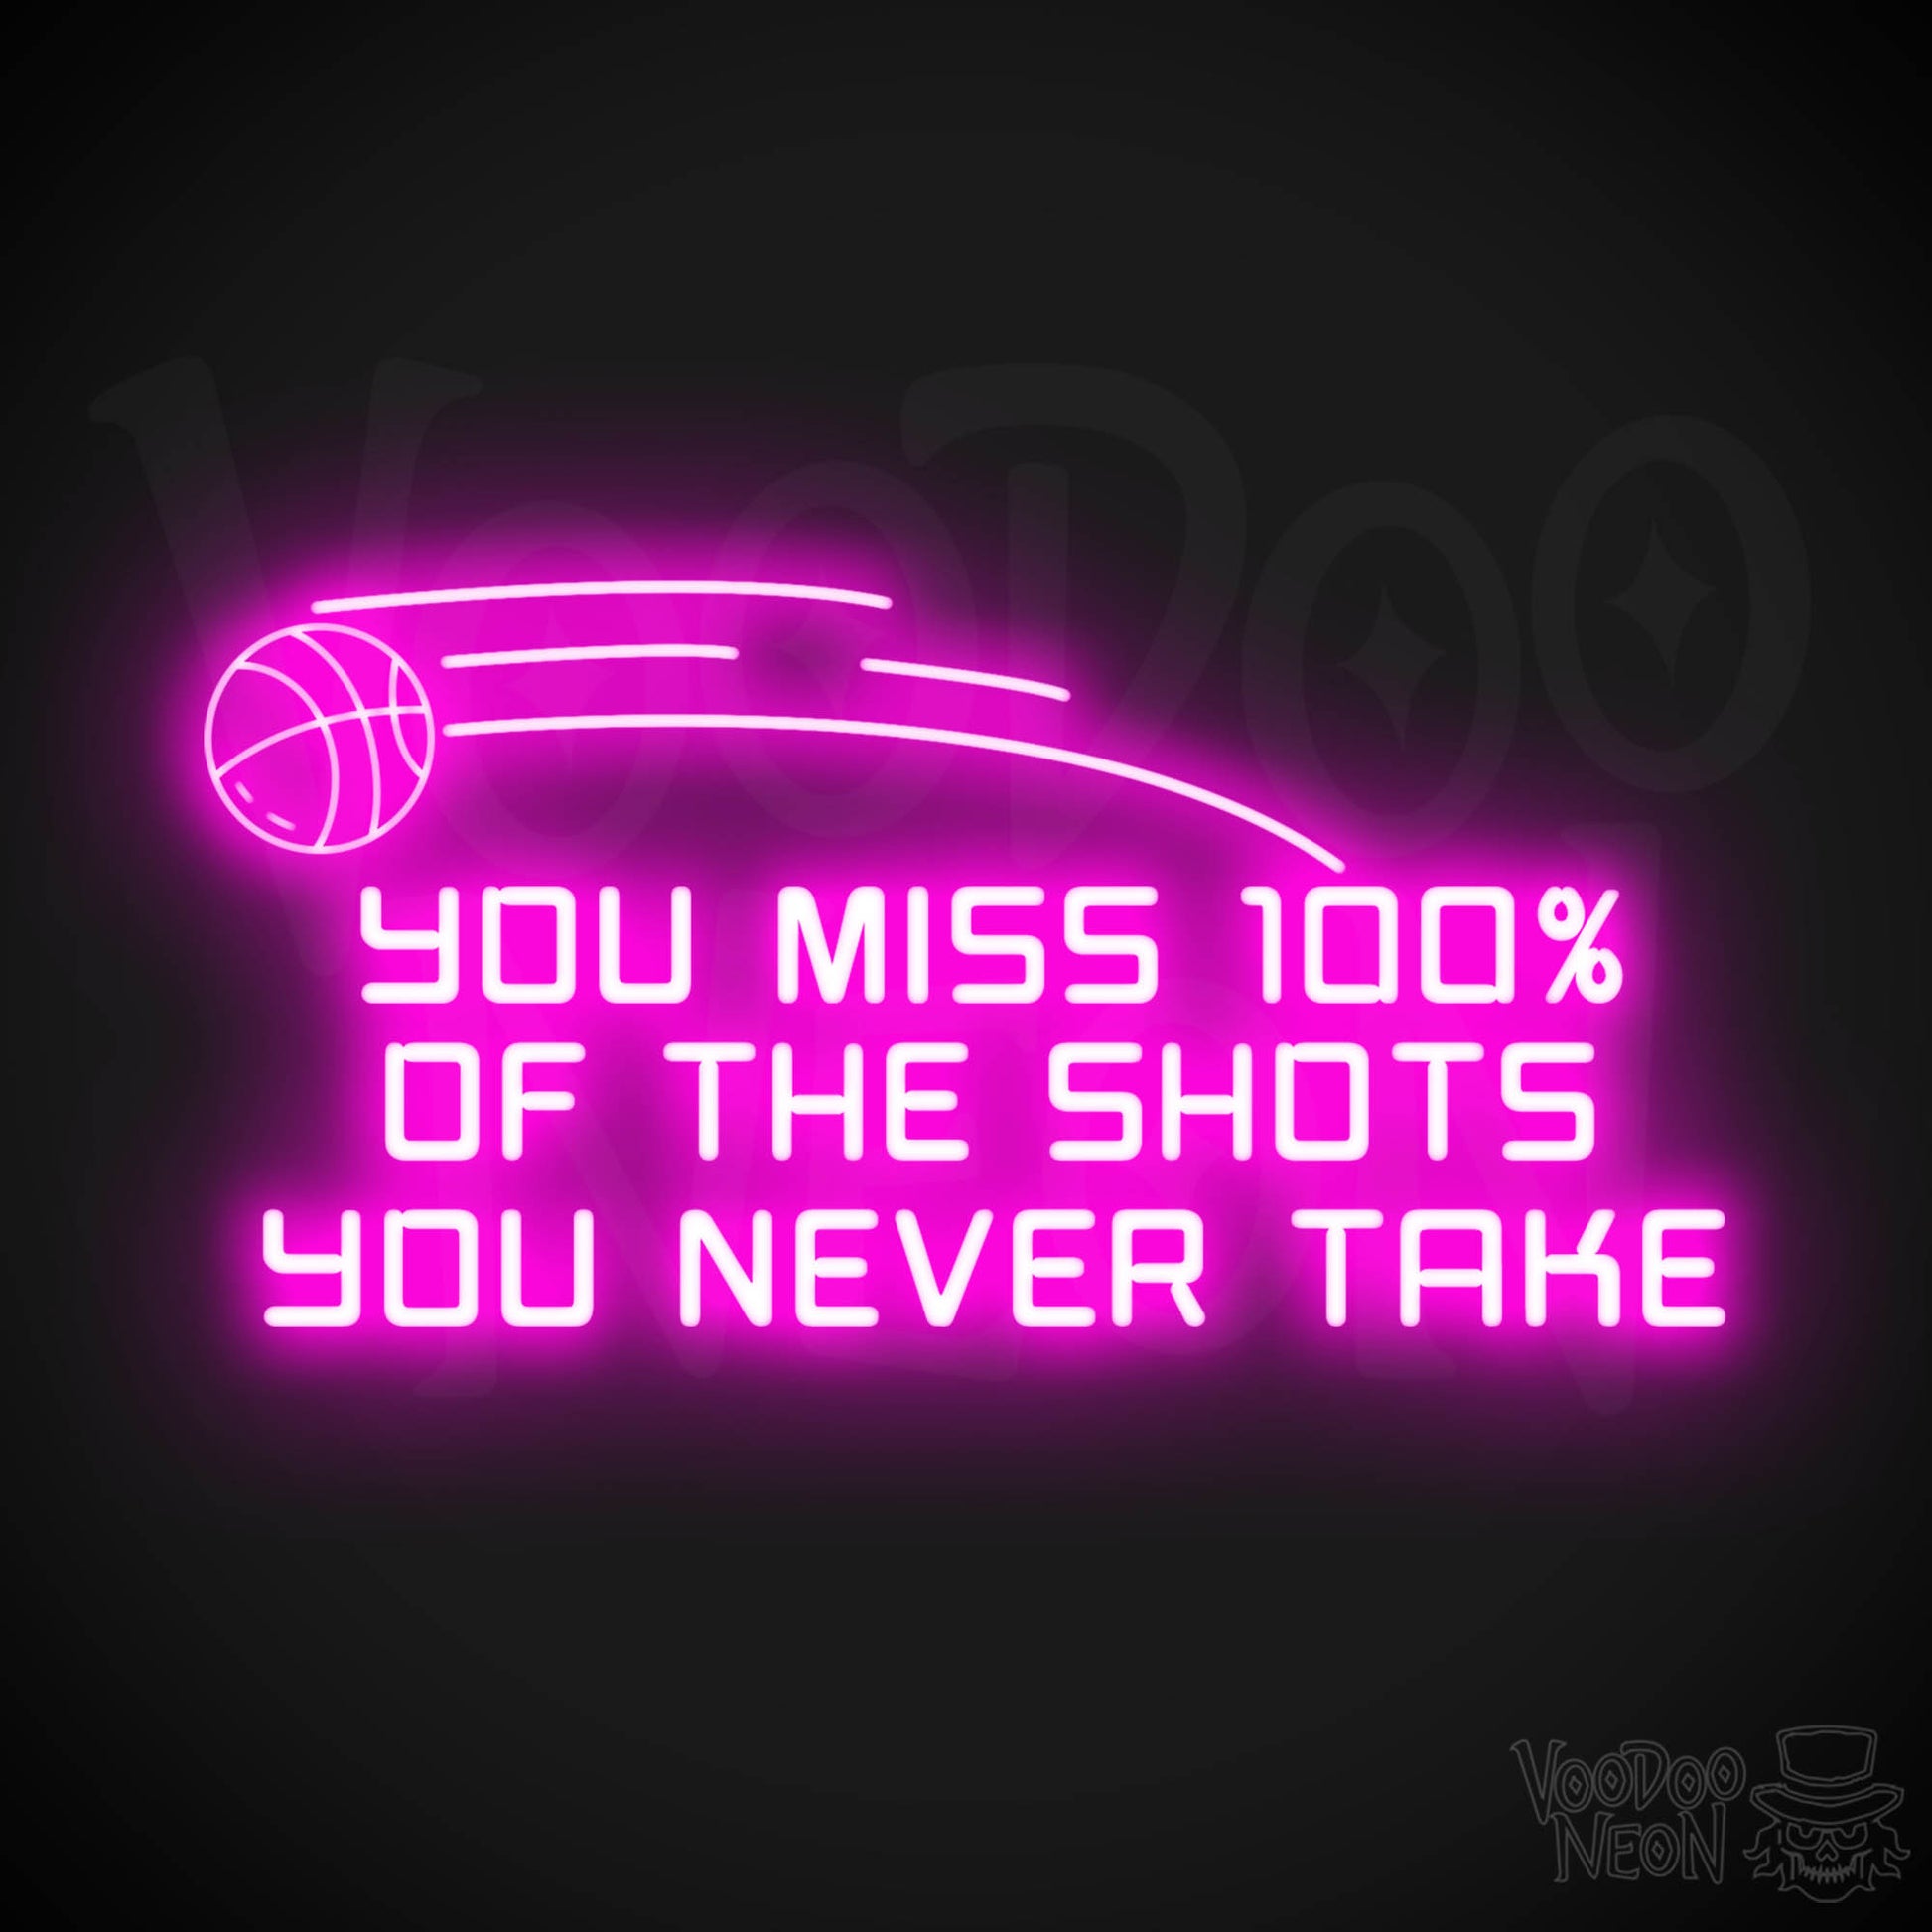 You Miss 100% of the Shots You Never Take Neon Sign - Neon Wall Art - Inspirational Signs - Color Pink